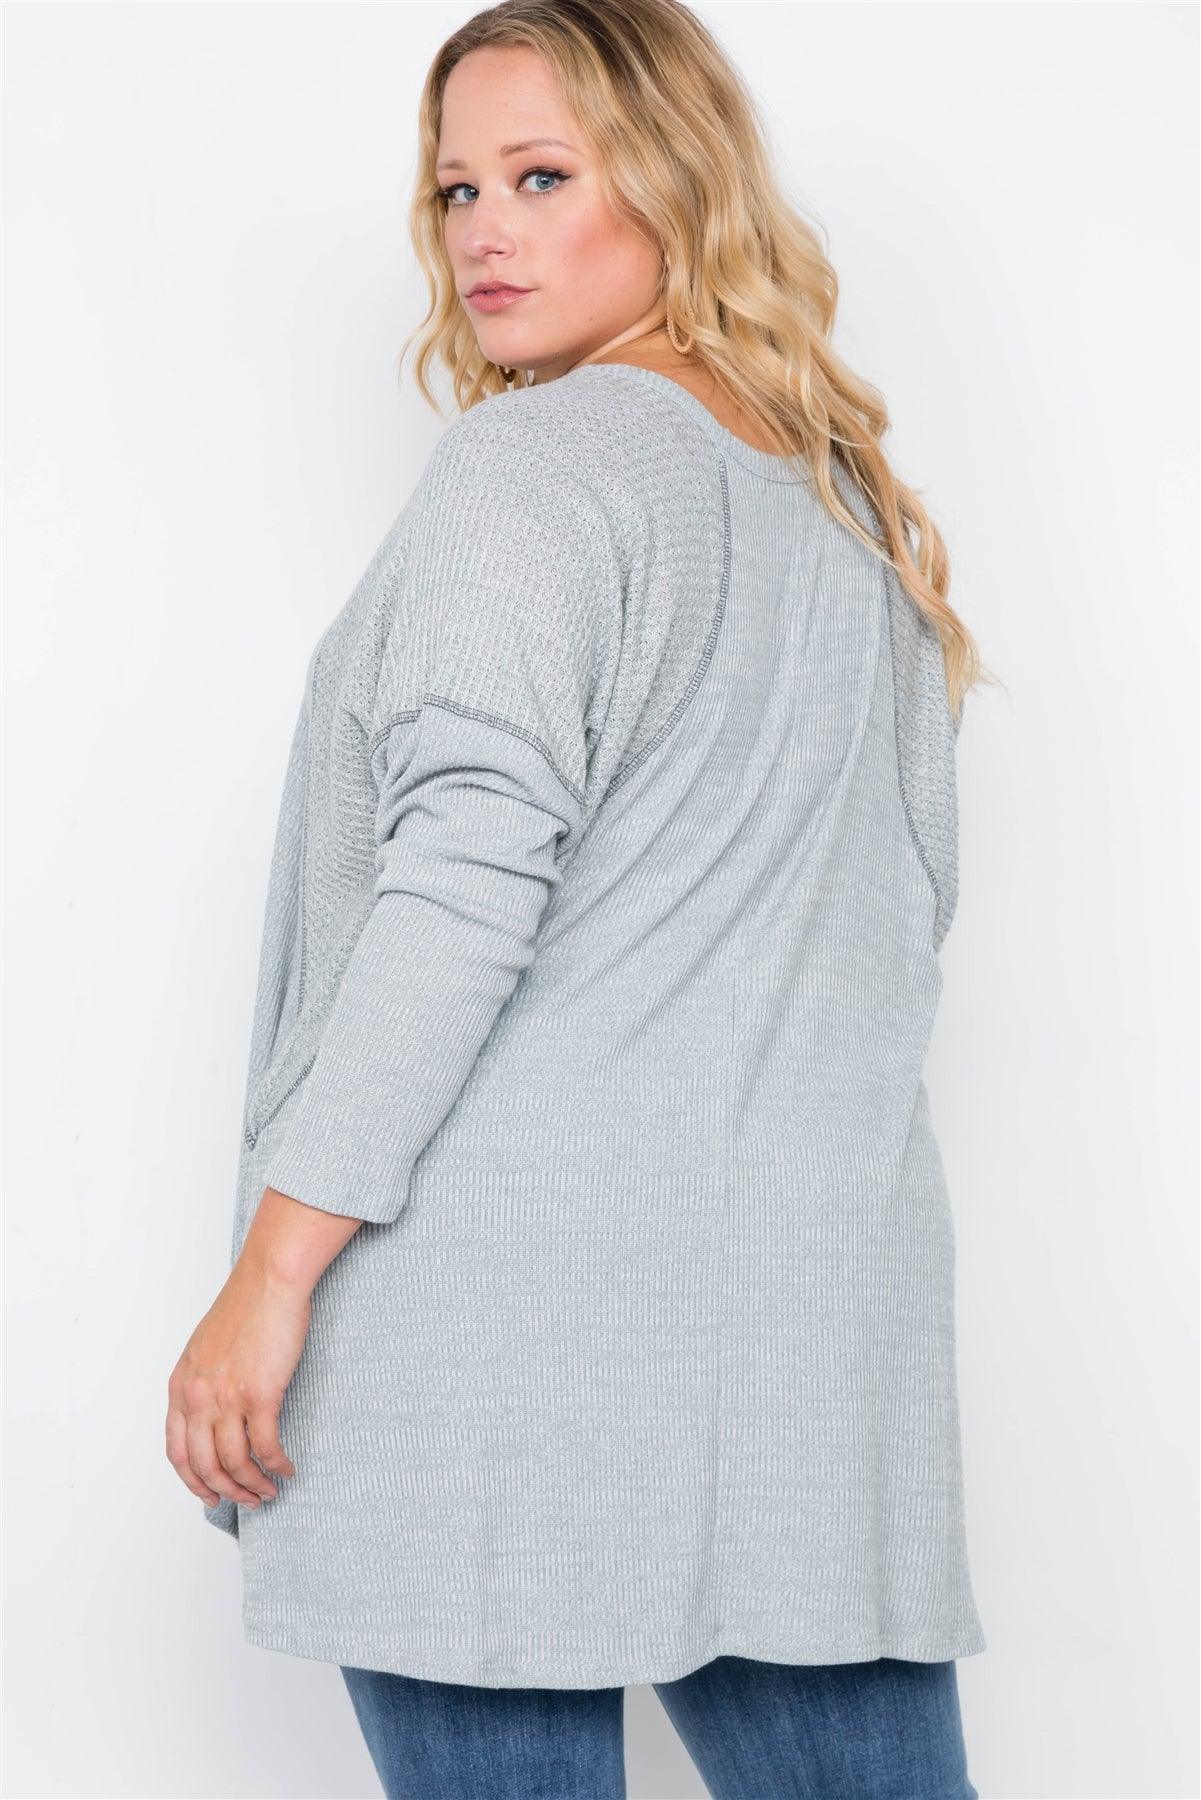 Plus Size Heather Grey Knit Long Sleeve Top